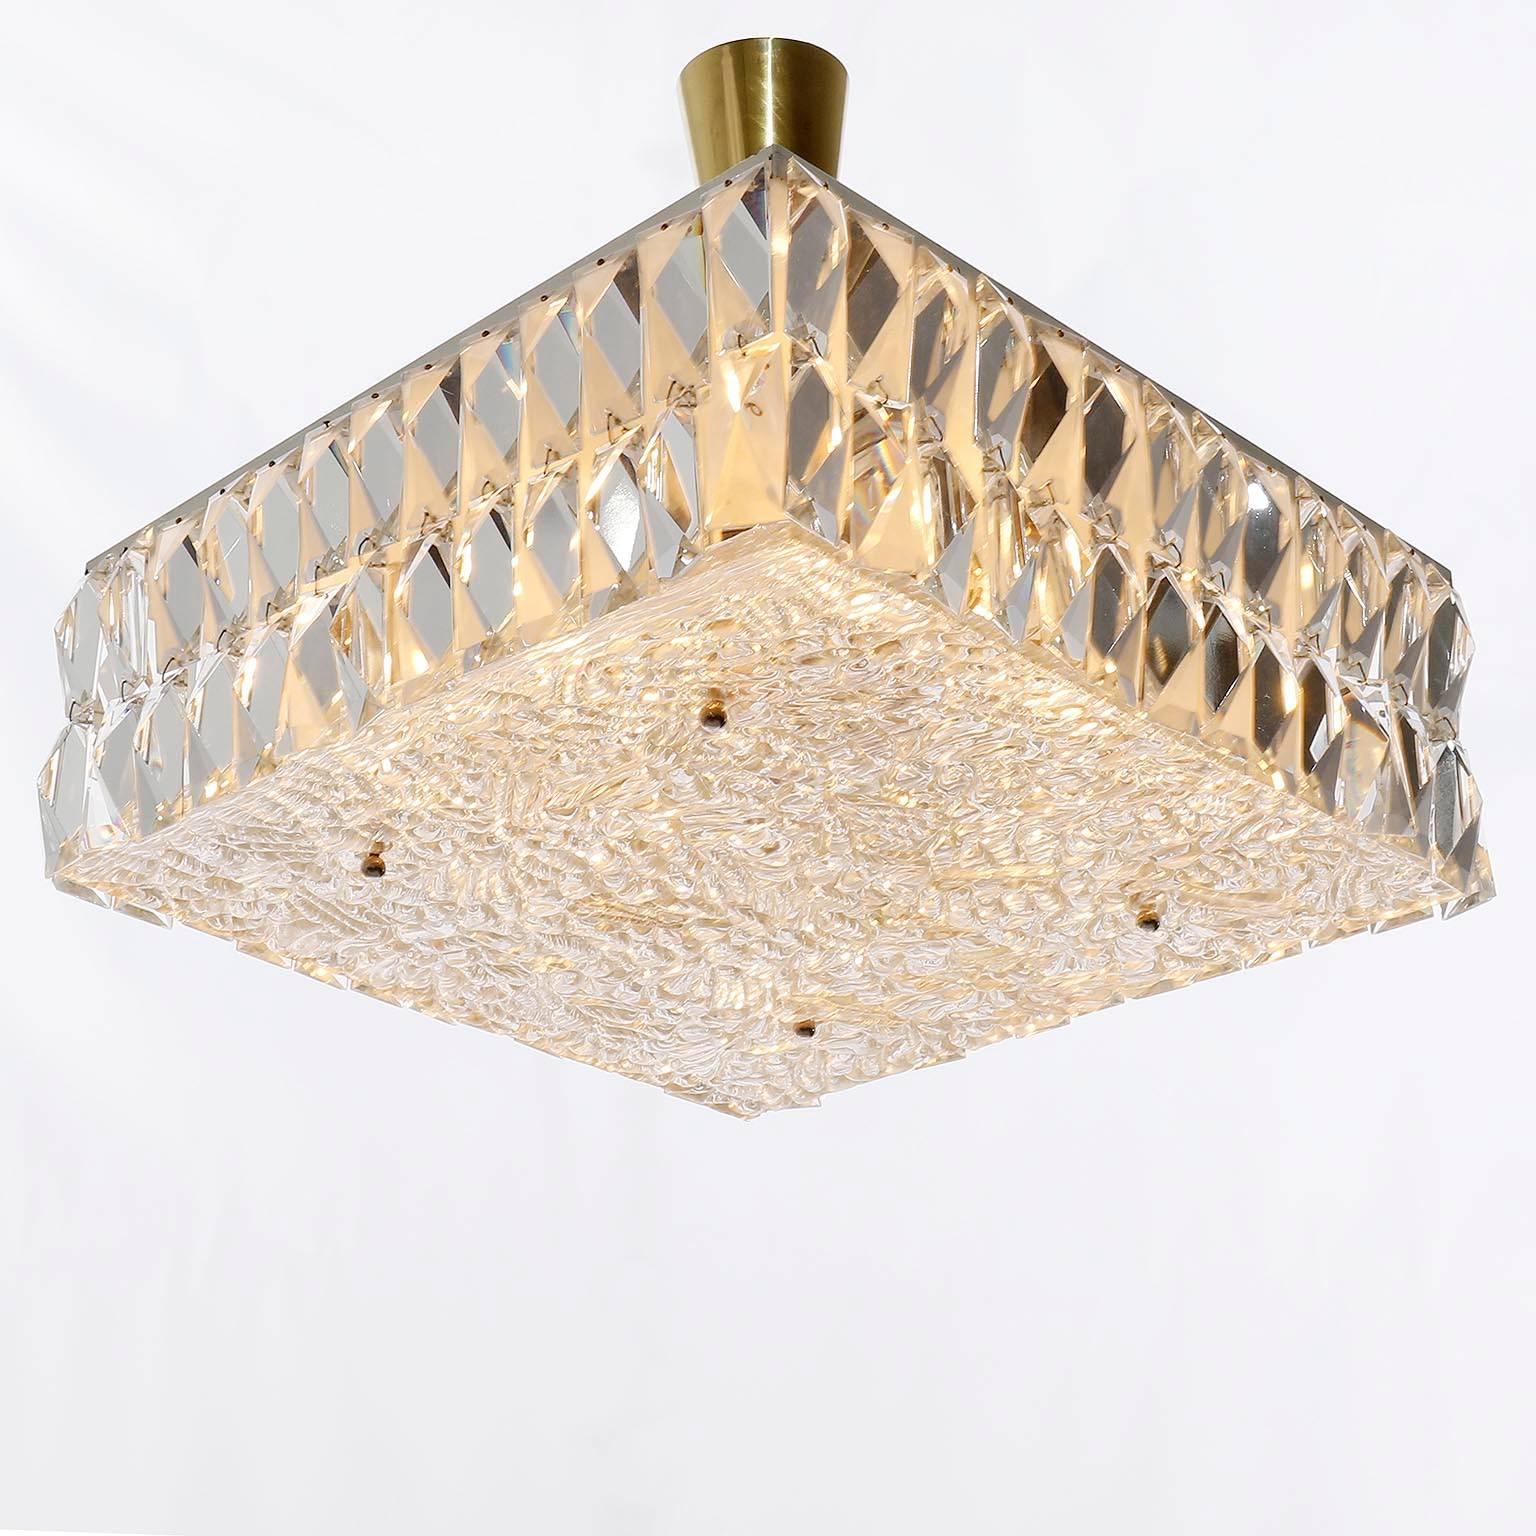 Enameled Square Kalmar Light Fixture, Textured and Crystal Glass, 1960s, One of Two